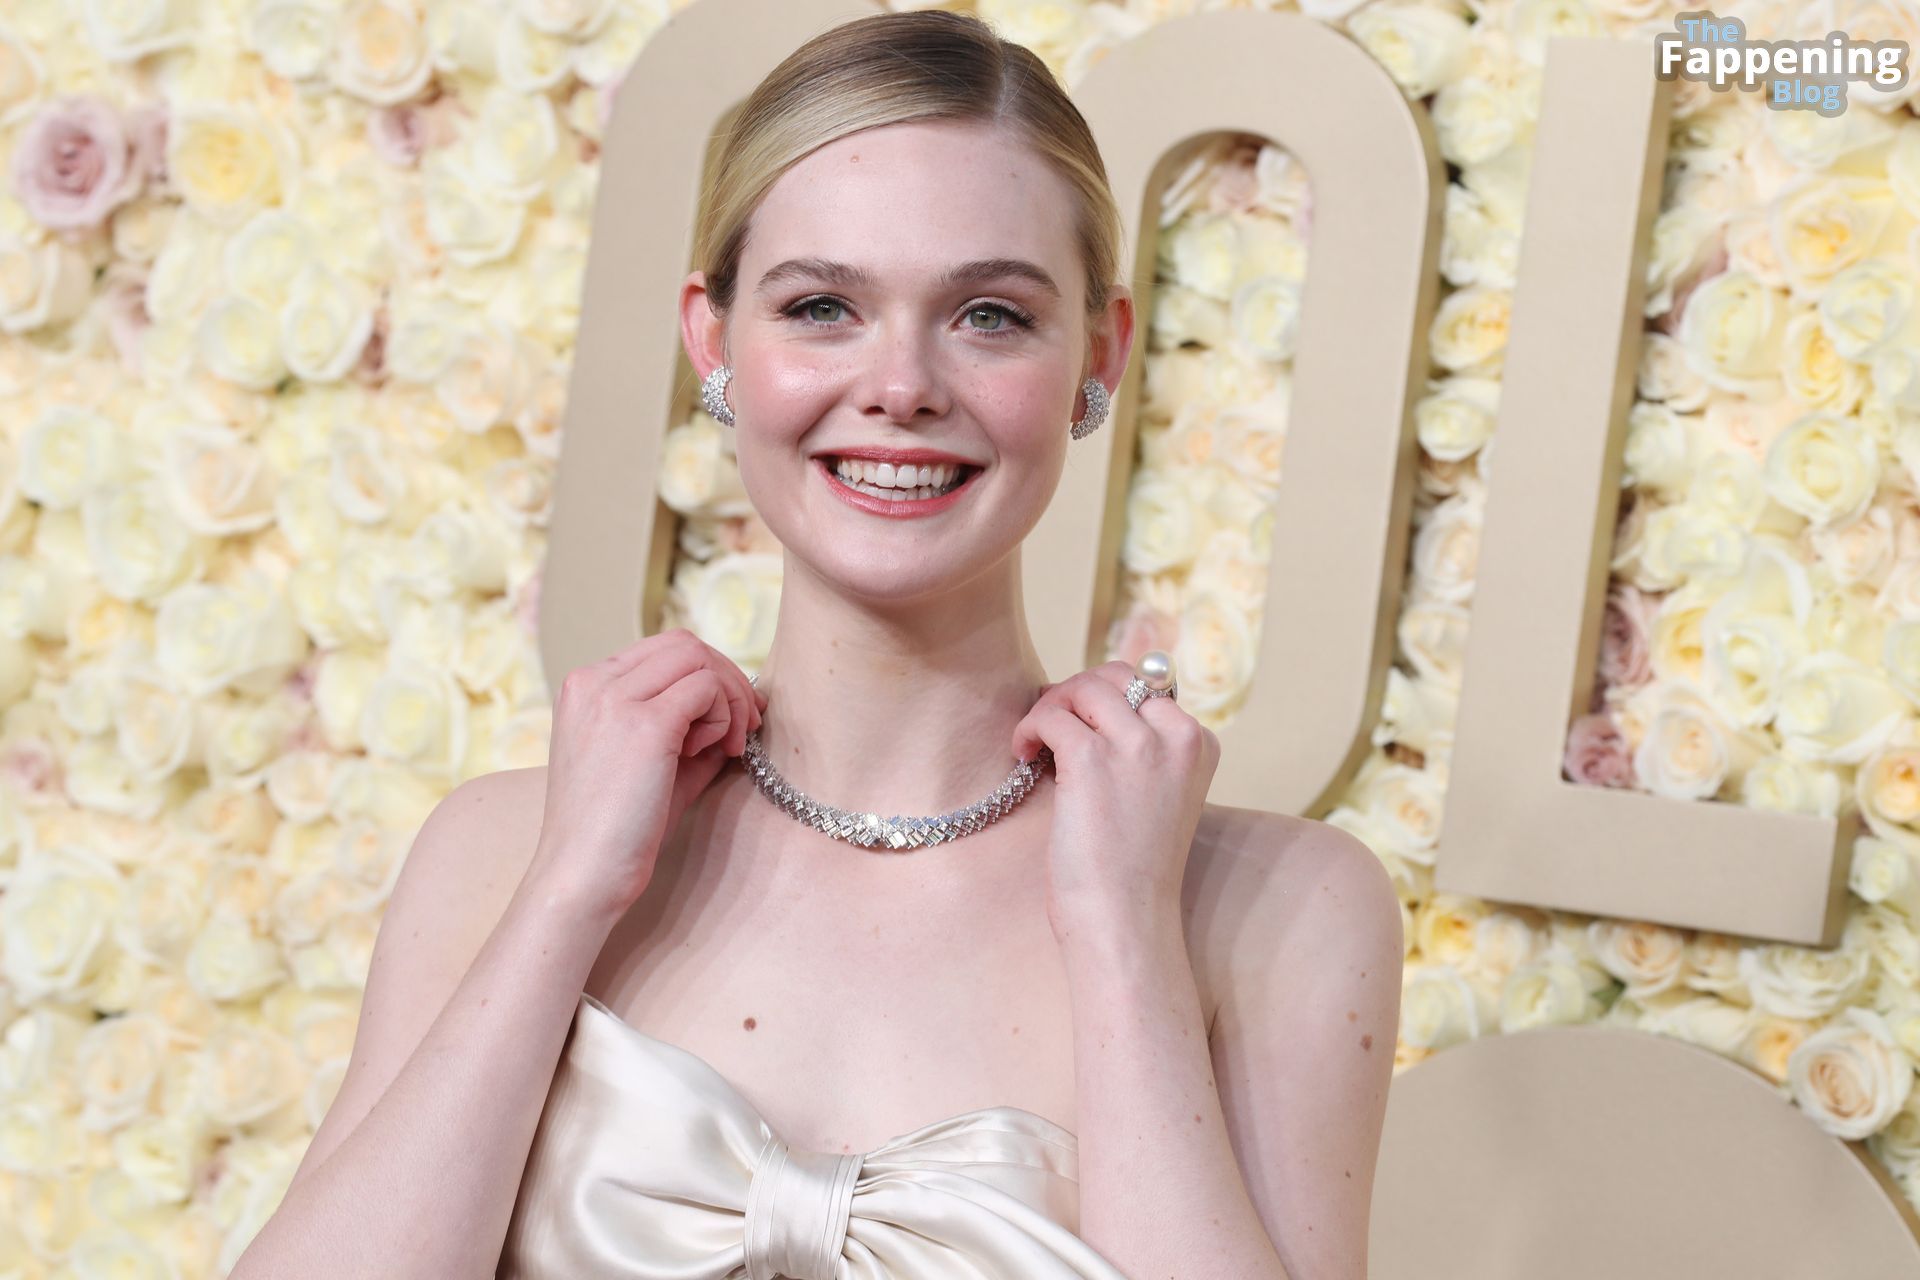 Elle-Fanning-Sexy-80-The-Fappening-Blog.jpg